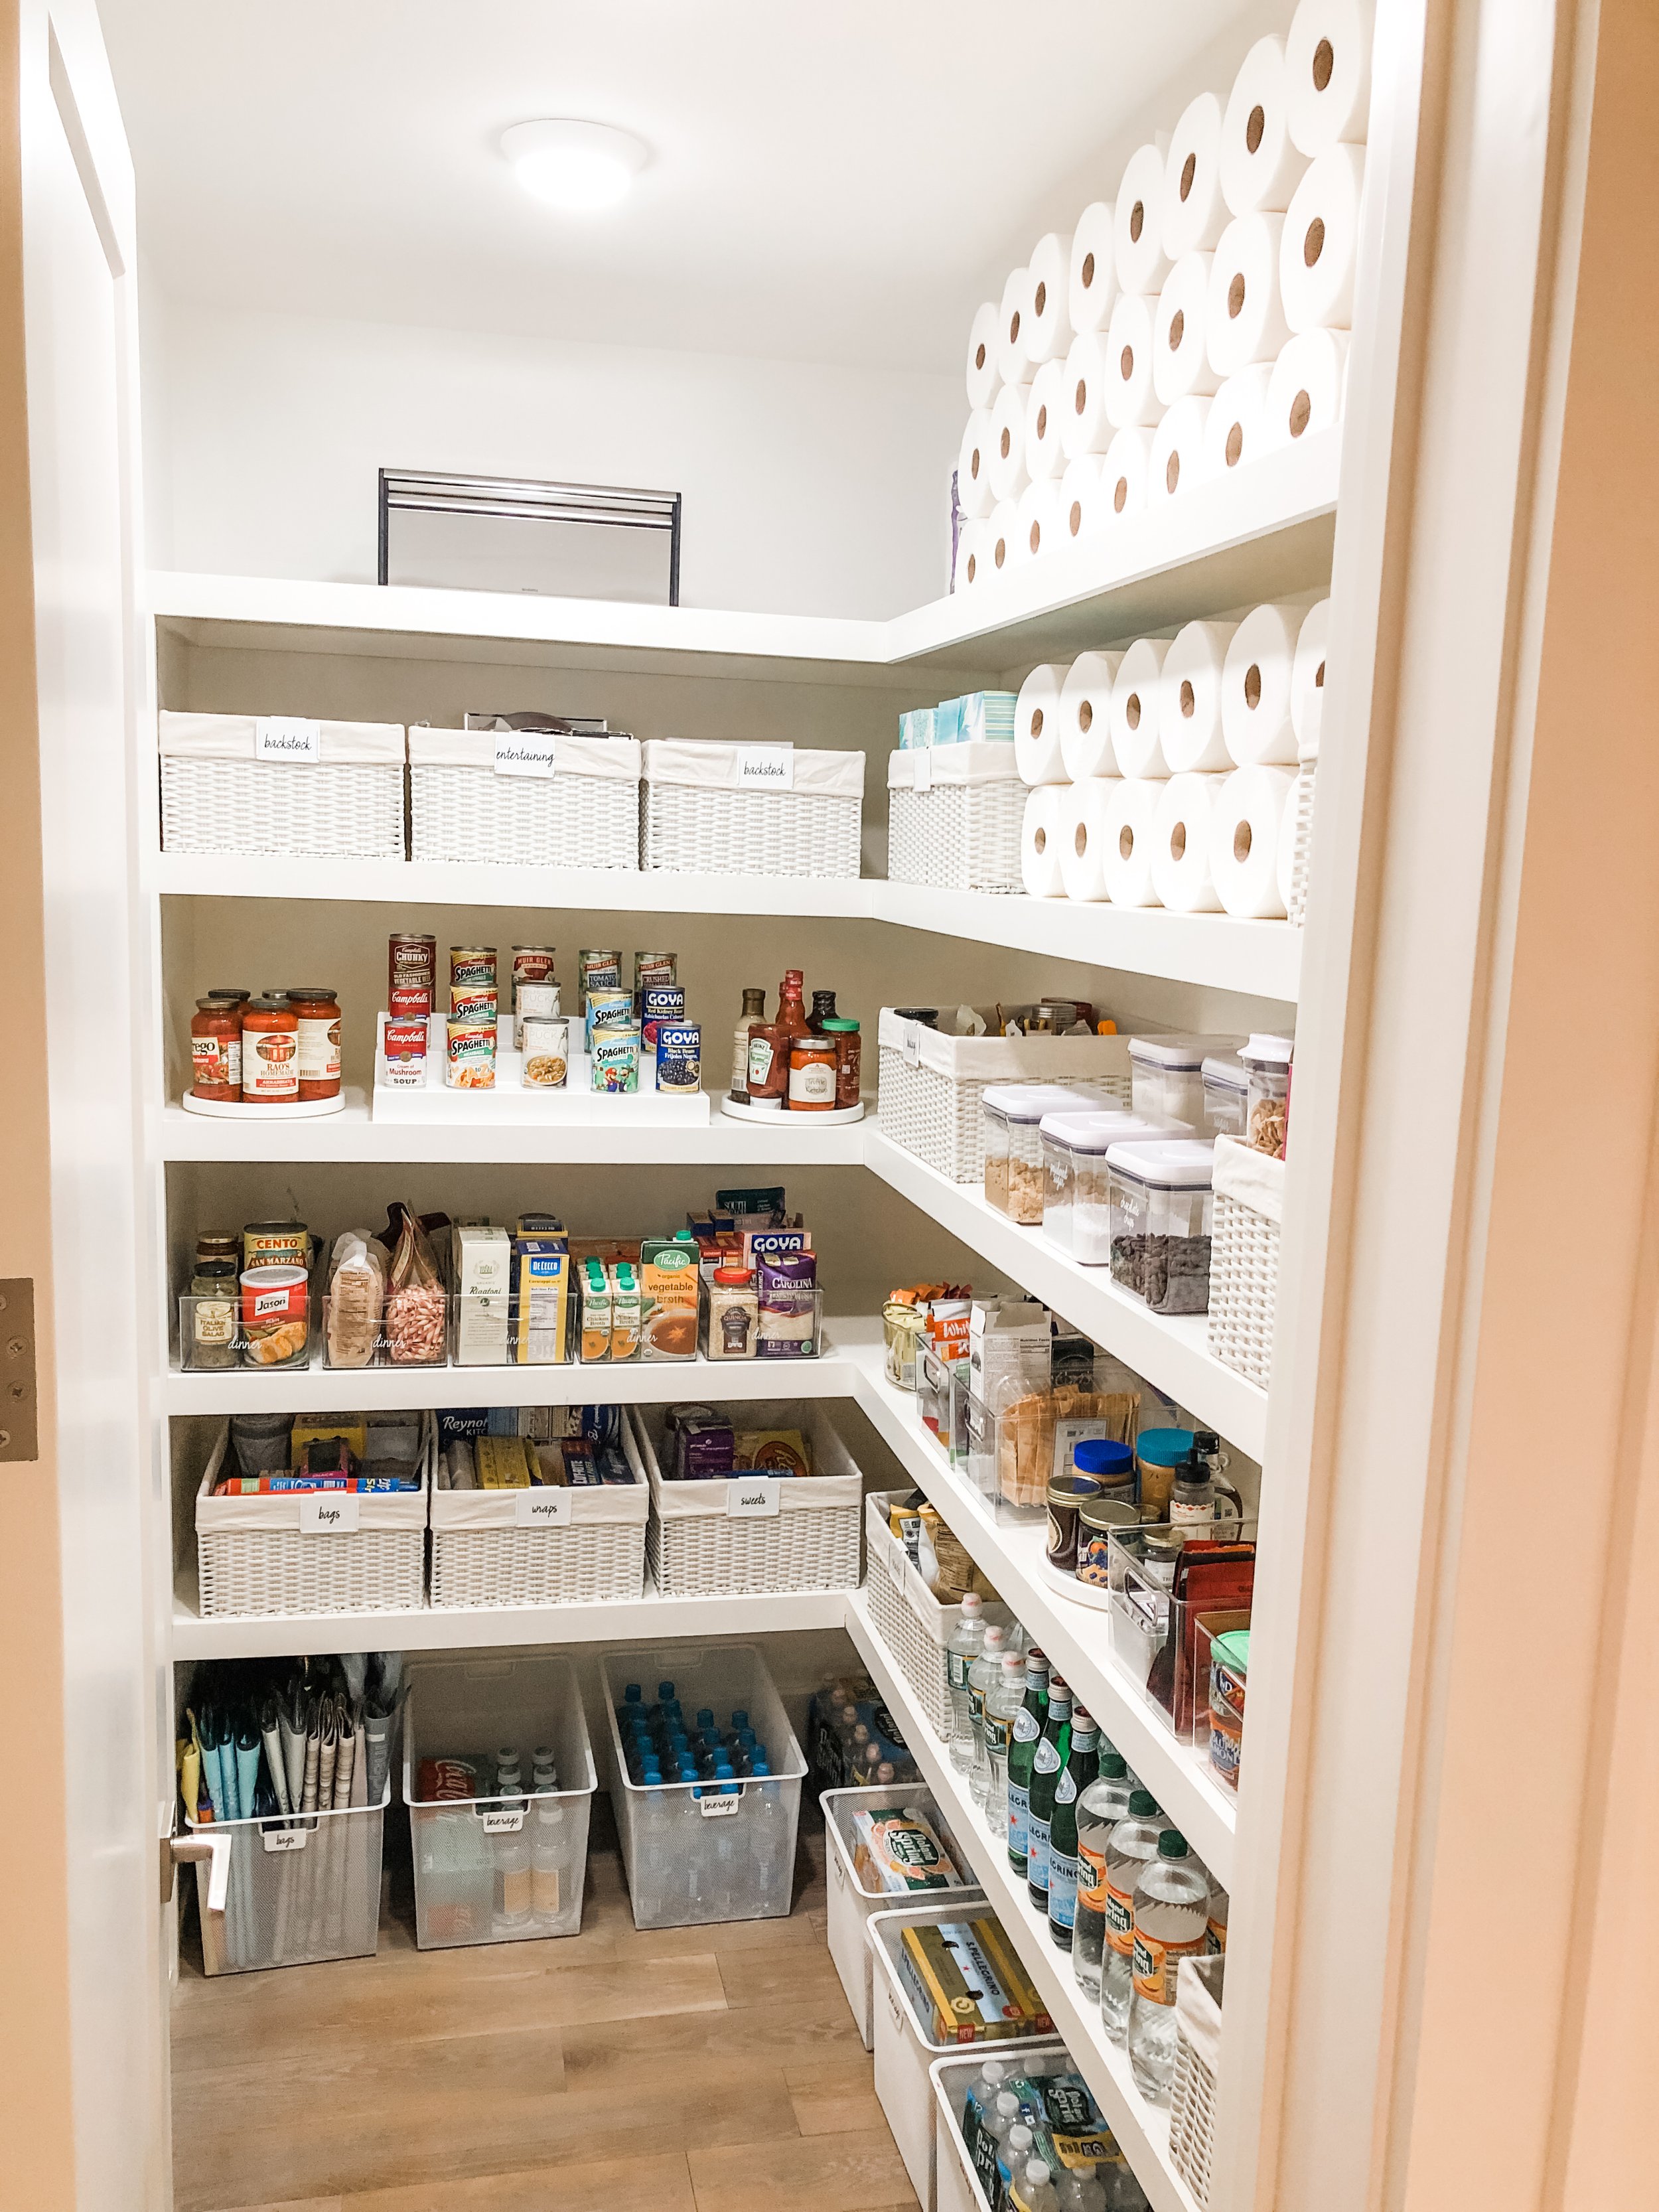 Kitchen walk-in pantry fully organized with bins, containers, and baskets